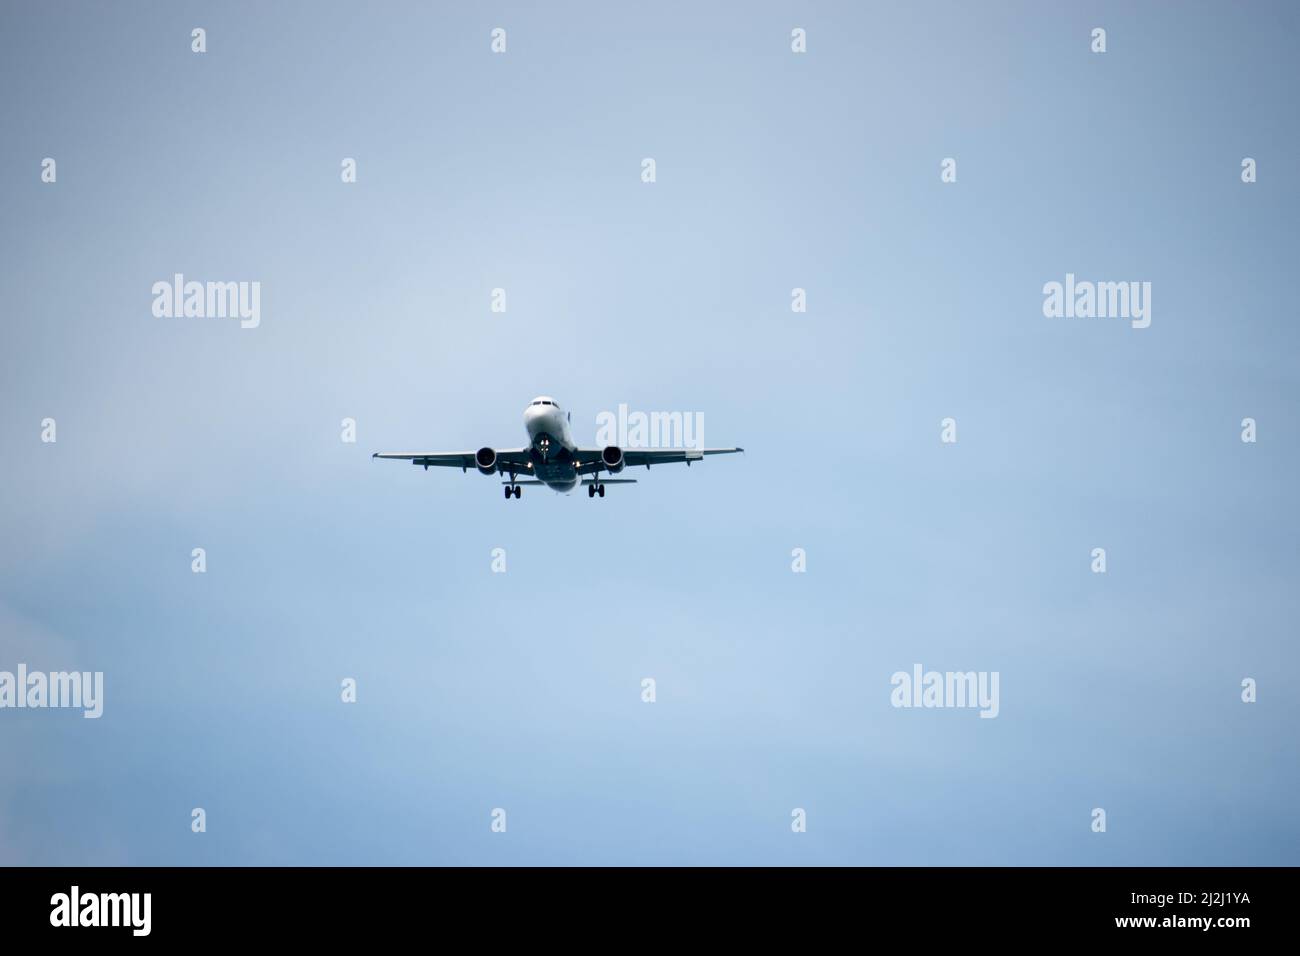 A Delta Airlines Airbus on final approach Stock Photo